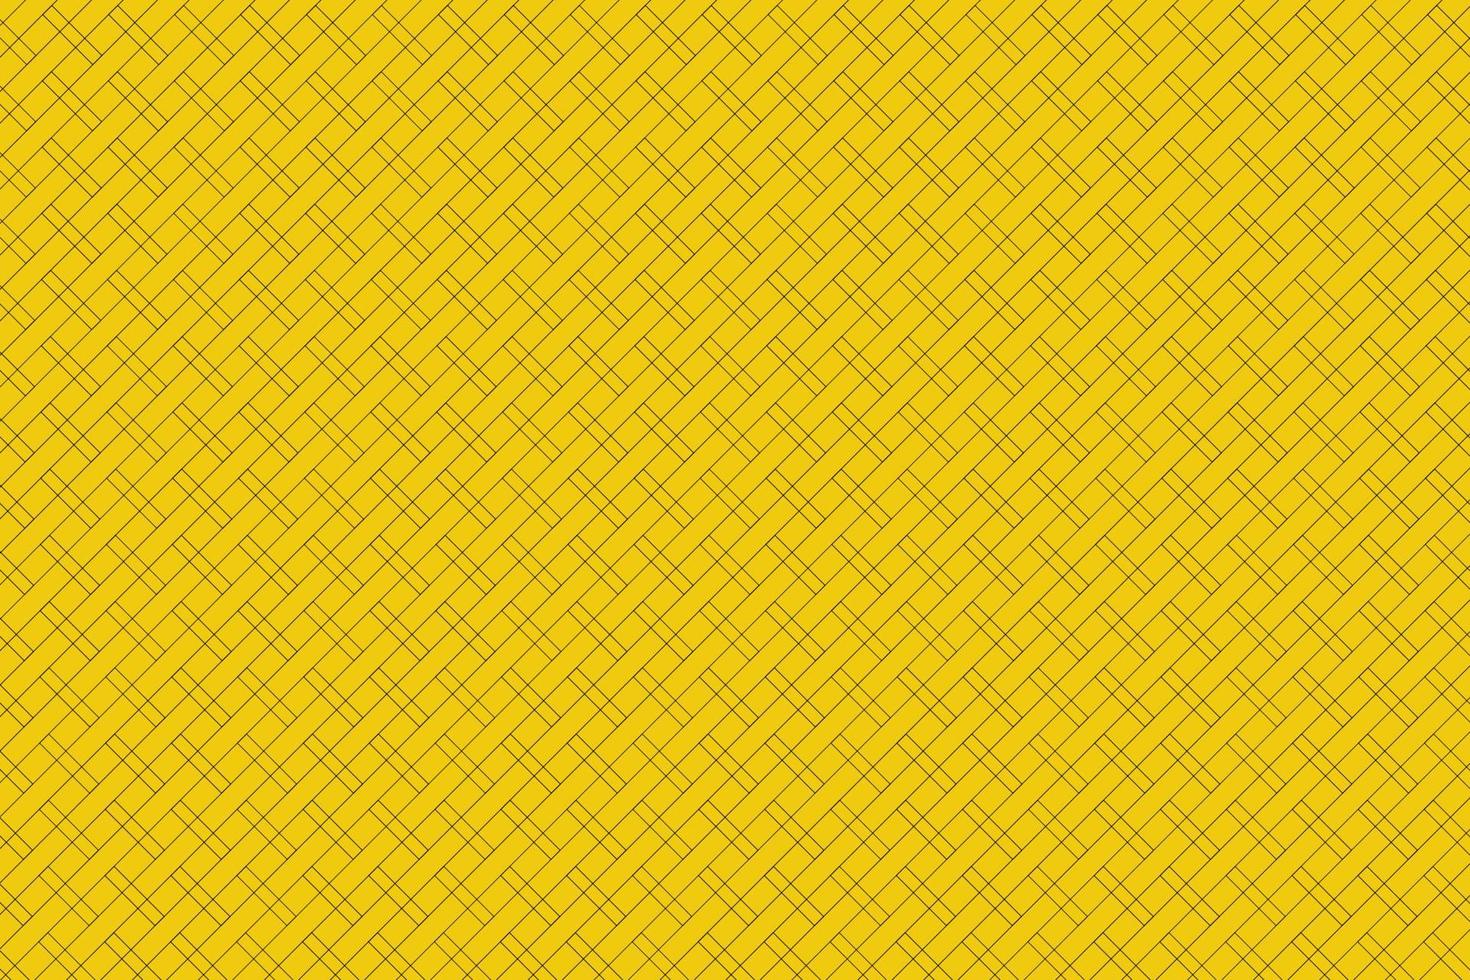 yellow background black stripes Intersect into equal sized channels Can be used to design work on vectors wallpapers etc